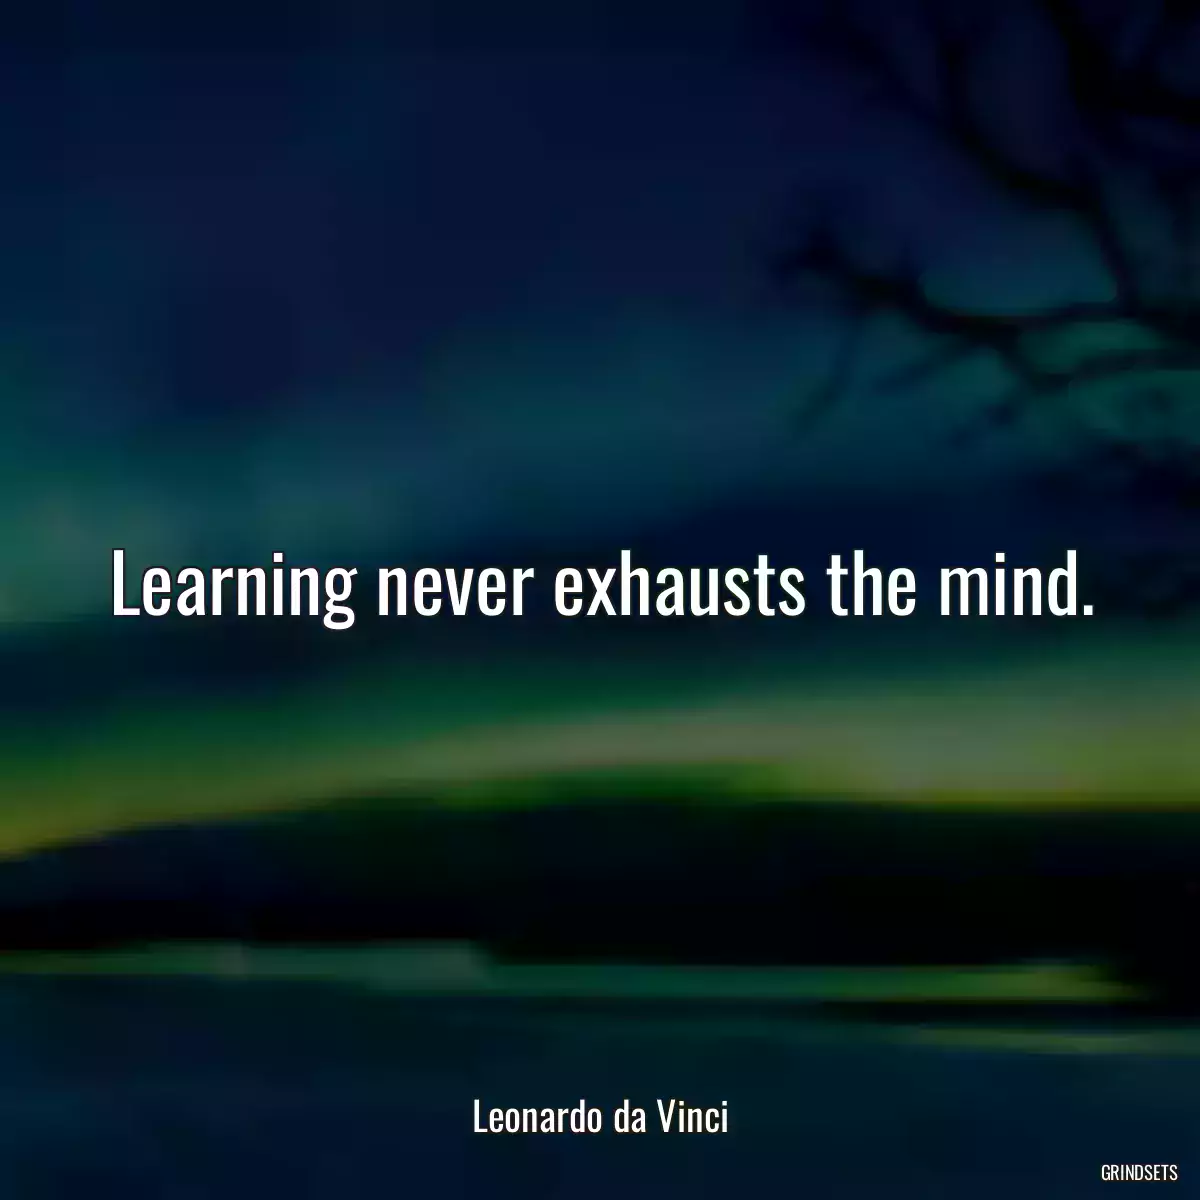 Learning never exhausts the mind.